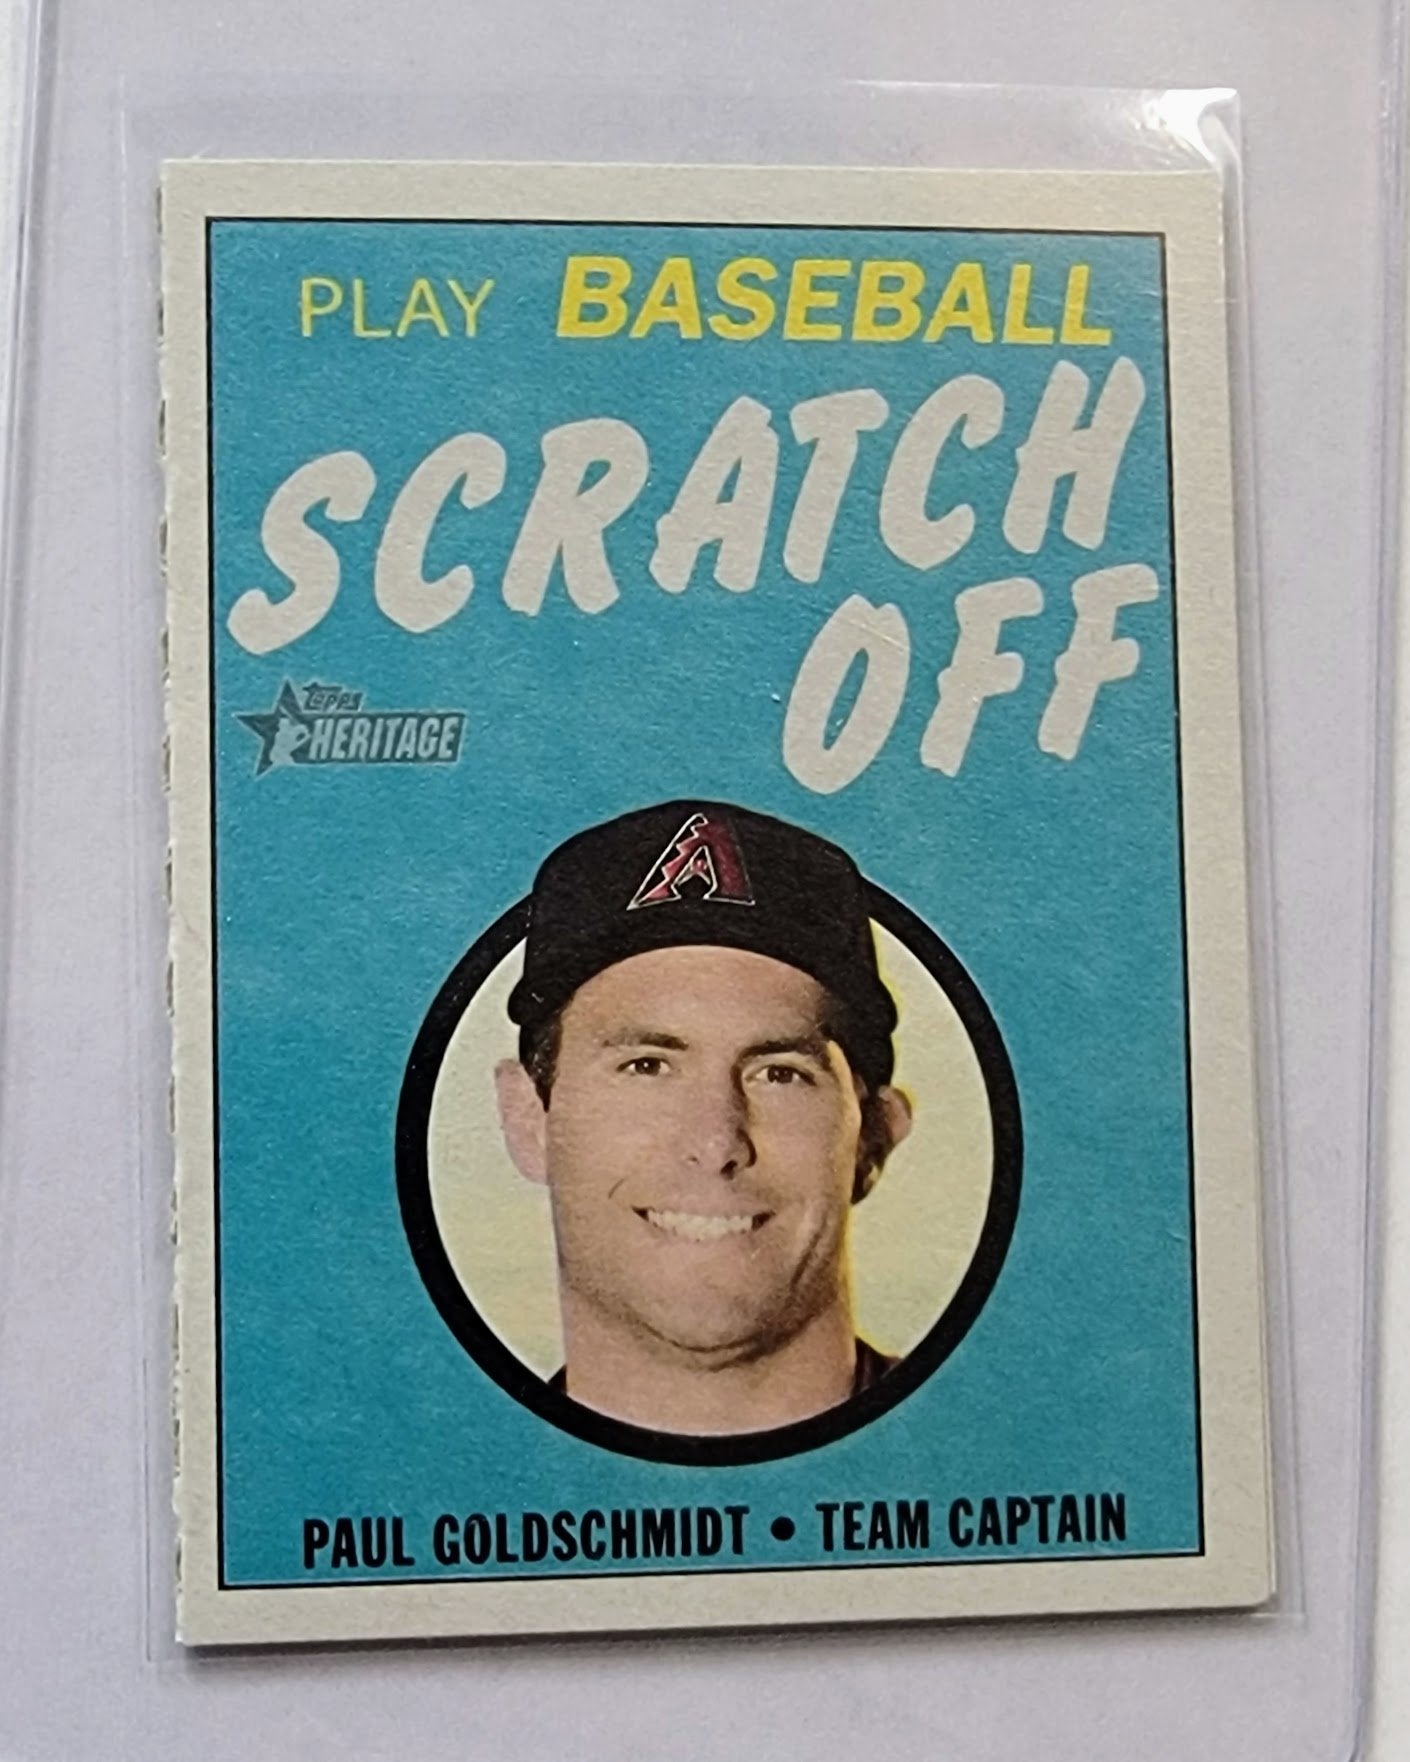 2018 Topps Heritage Paul Goldschmidt Play Baseball Scratch-off Baseball Card TPTV simple Xclusive Collectibles   